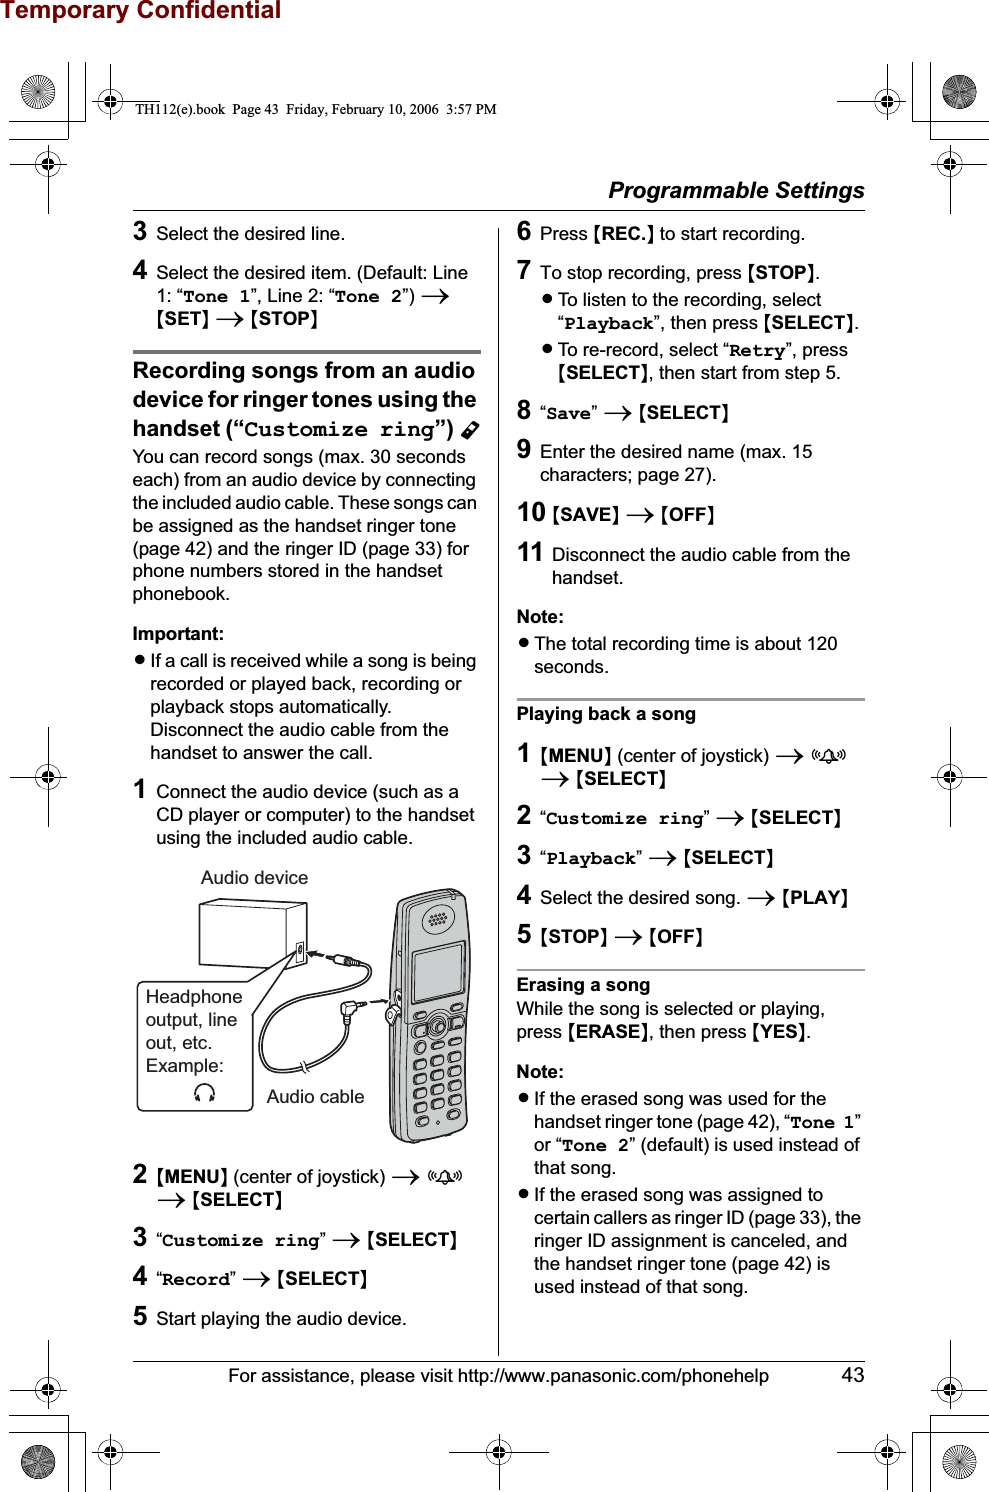 Temporary ConfidentialProgrammable SettingsFor assistance, please visit http://www.panasonic.com/phonehelp 433Select the desired line.4Select the desired item. (Default: Line 1: “Tone 1”, Line 2: “Tone 2”) i{SET}i{STOP}Recording songs from an audio device for ringer tones using the handset (“Customize ring”) YYou can record songs (max. 30 seconds each) from an audio device by connecting the included audio cable. These songs can be assigned as the handset ringer tone (page 42) and the ringer ID (page 33) for phone numbers stored in the handset phonebook.Important:LIf a call is received while a song is being recorded or played back, recording or playback stops automatically. Disconnect the audio cable from the handset to answer the call.1Connect the audio device (such as a CD player or computer) to the handset using the included audio cable.2{MENU} (center of joystick) ifi{SELECT}3“Customize ring”i{SELECT}4“Record”i{SELECT}5Start playing the audio device.6Press {REC.} to start recording.7To stop recording, press {STOP}.LTo listen to the recording, select “Playback”, then press {SELECT}.LTo re-record, select “Retry”, press {SELECT}, then start from step 5.8“Save”i{SELECT}9Enter the desired name (max. 15 characters; page 27).10 {SAVE}i{OFF}11 Disconnect the audio cable from the handset.Note:LThe total recording time is about 120 seconds. Playing back a song1{MENU} (center of joystick) ifi{SELECT}2“Customize ring”i{SELECT}3“Playback”i{SELECT}4Select the desired song. i{PLAY}5{STOP}i{OFF}Erasing a songWhile the song is selected or playing, press {ERASE}, then press {YES}.Note:LIf the erased song was used for the handset ringer tone (page 42), “Tone 1”or “Tone 2” (default) is used instead of that song.LIf the erased song was assigned to certain callers as ringer ID (page 33), the ringer ID assignment is canceled, and the handset ringer tone (page 42) is used instead of that song.Audio device Audio cableHeadphoneoutput, lineout, etc. Example:TH112(e).book  Page 43  Friday, February 10, 2006  3:57 PM